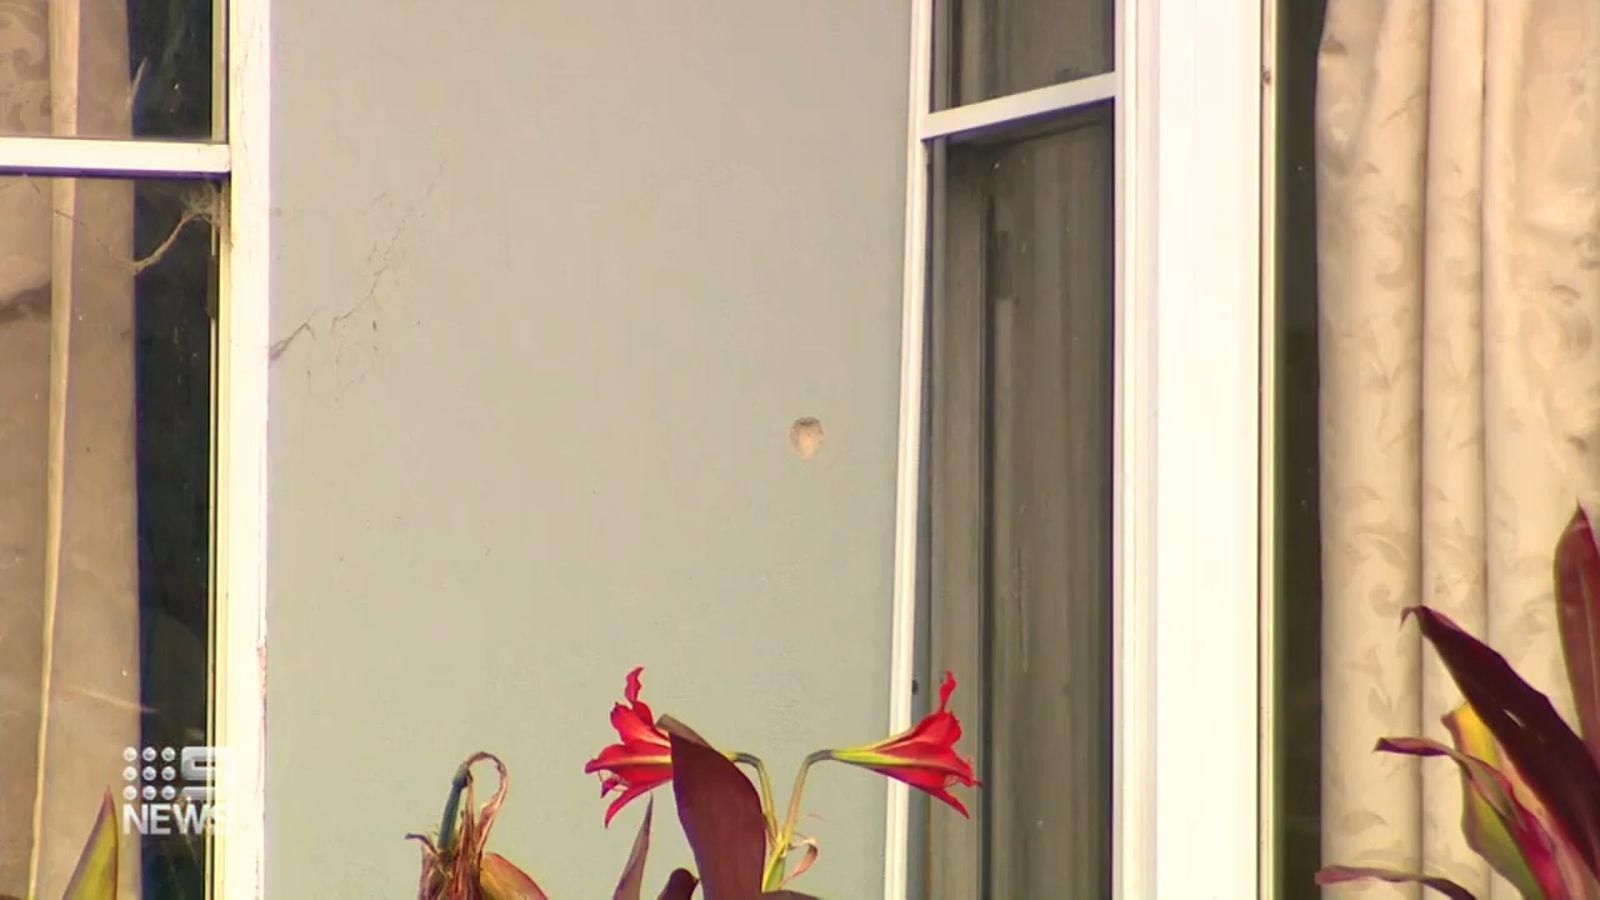 Bullets were peppered across the windows and walls of the family home's living room. (9News)